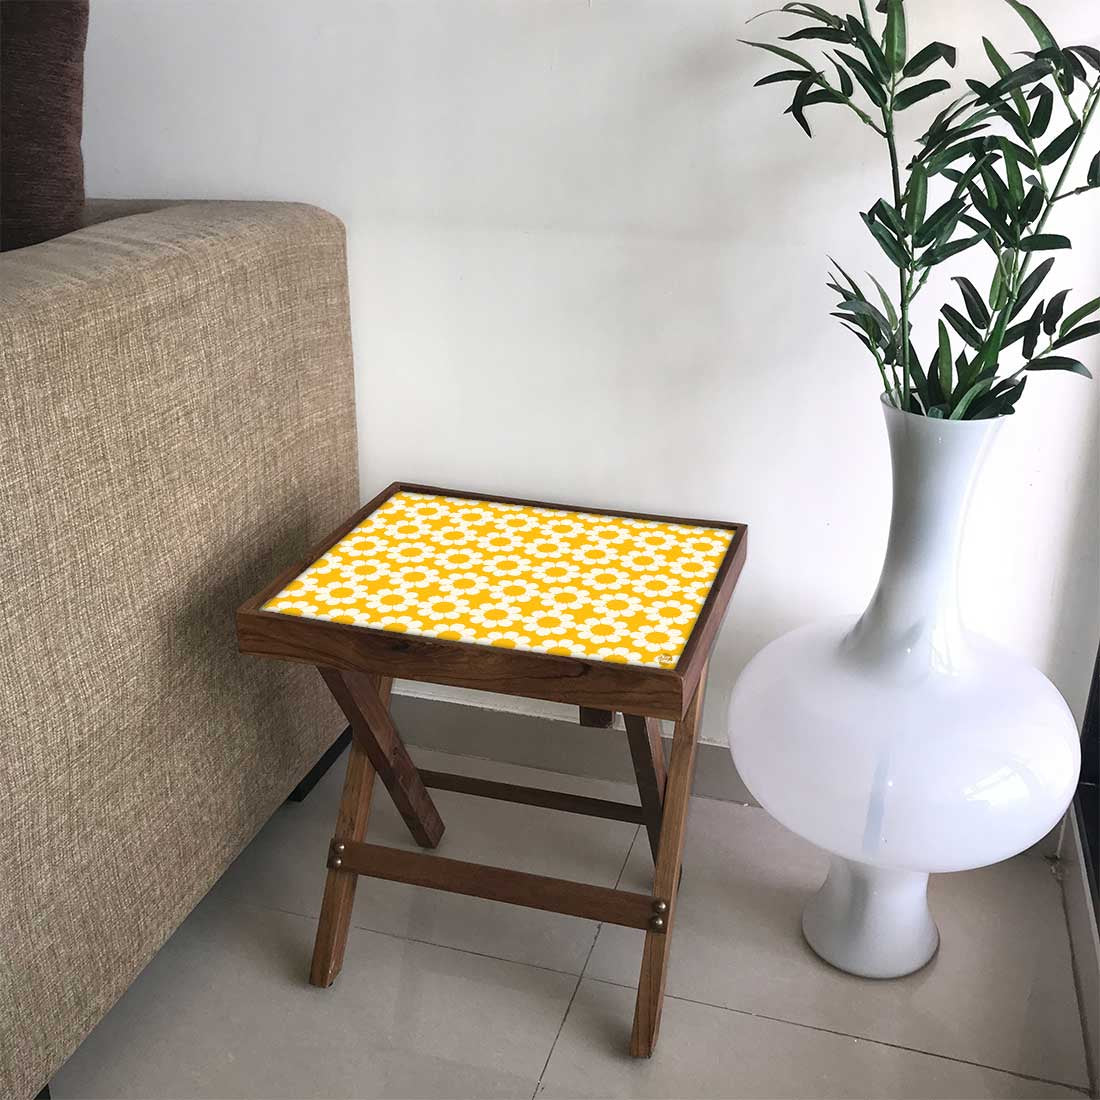 Folding Side Table - Teak Wood - Flower With Yellow Backgroung